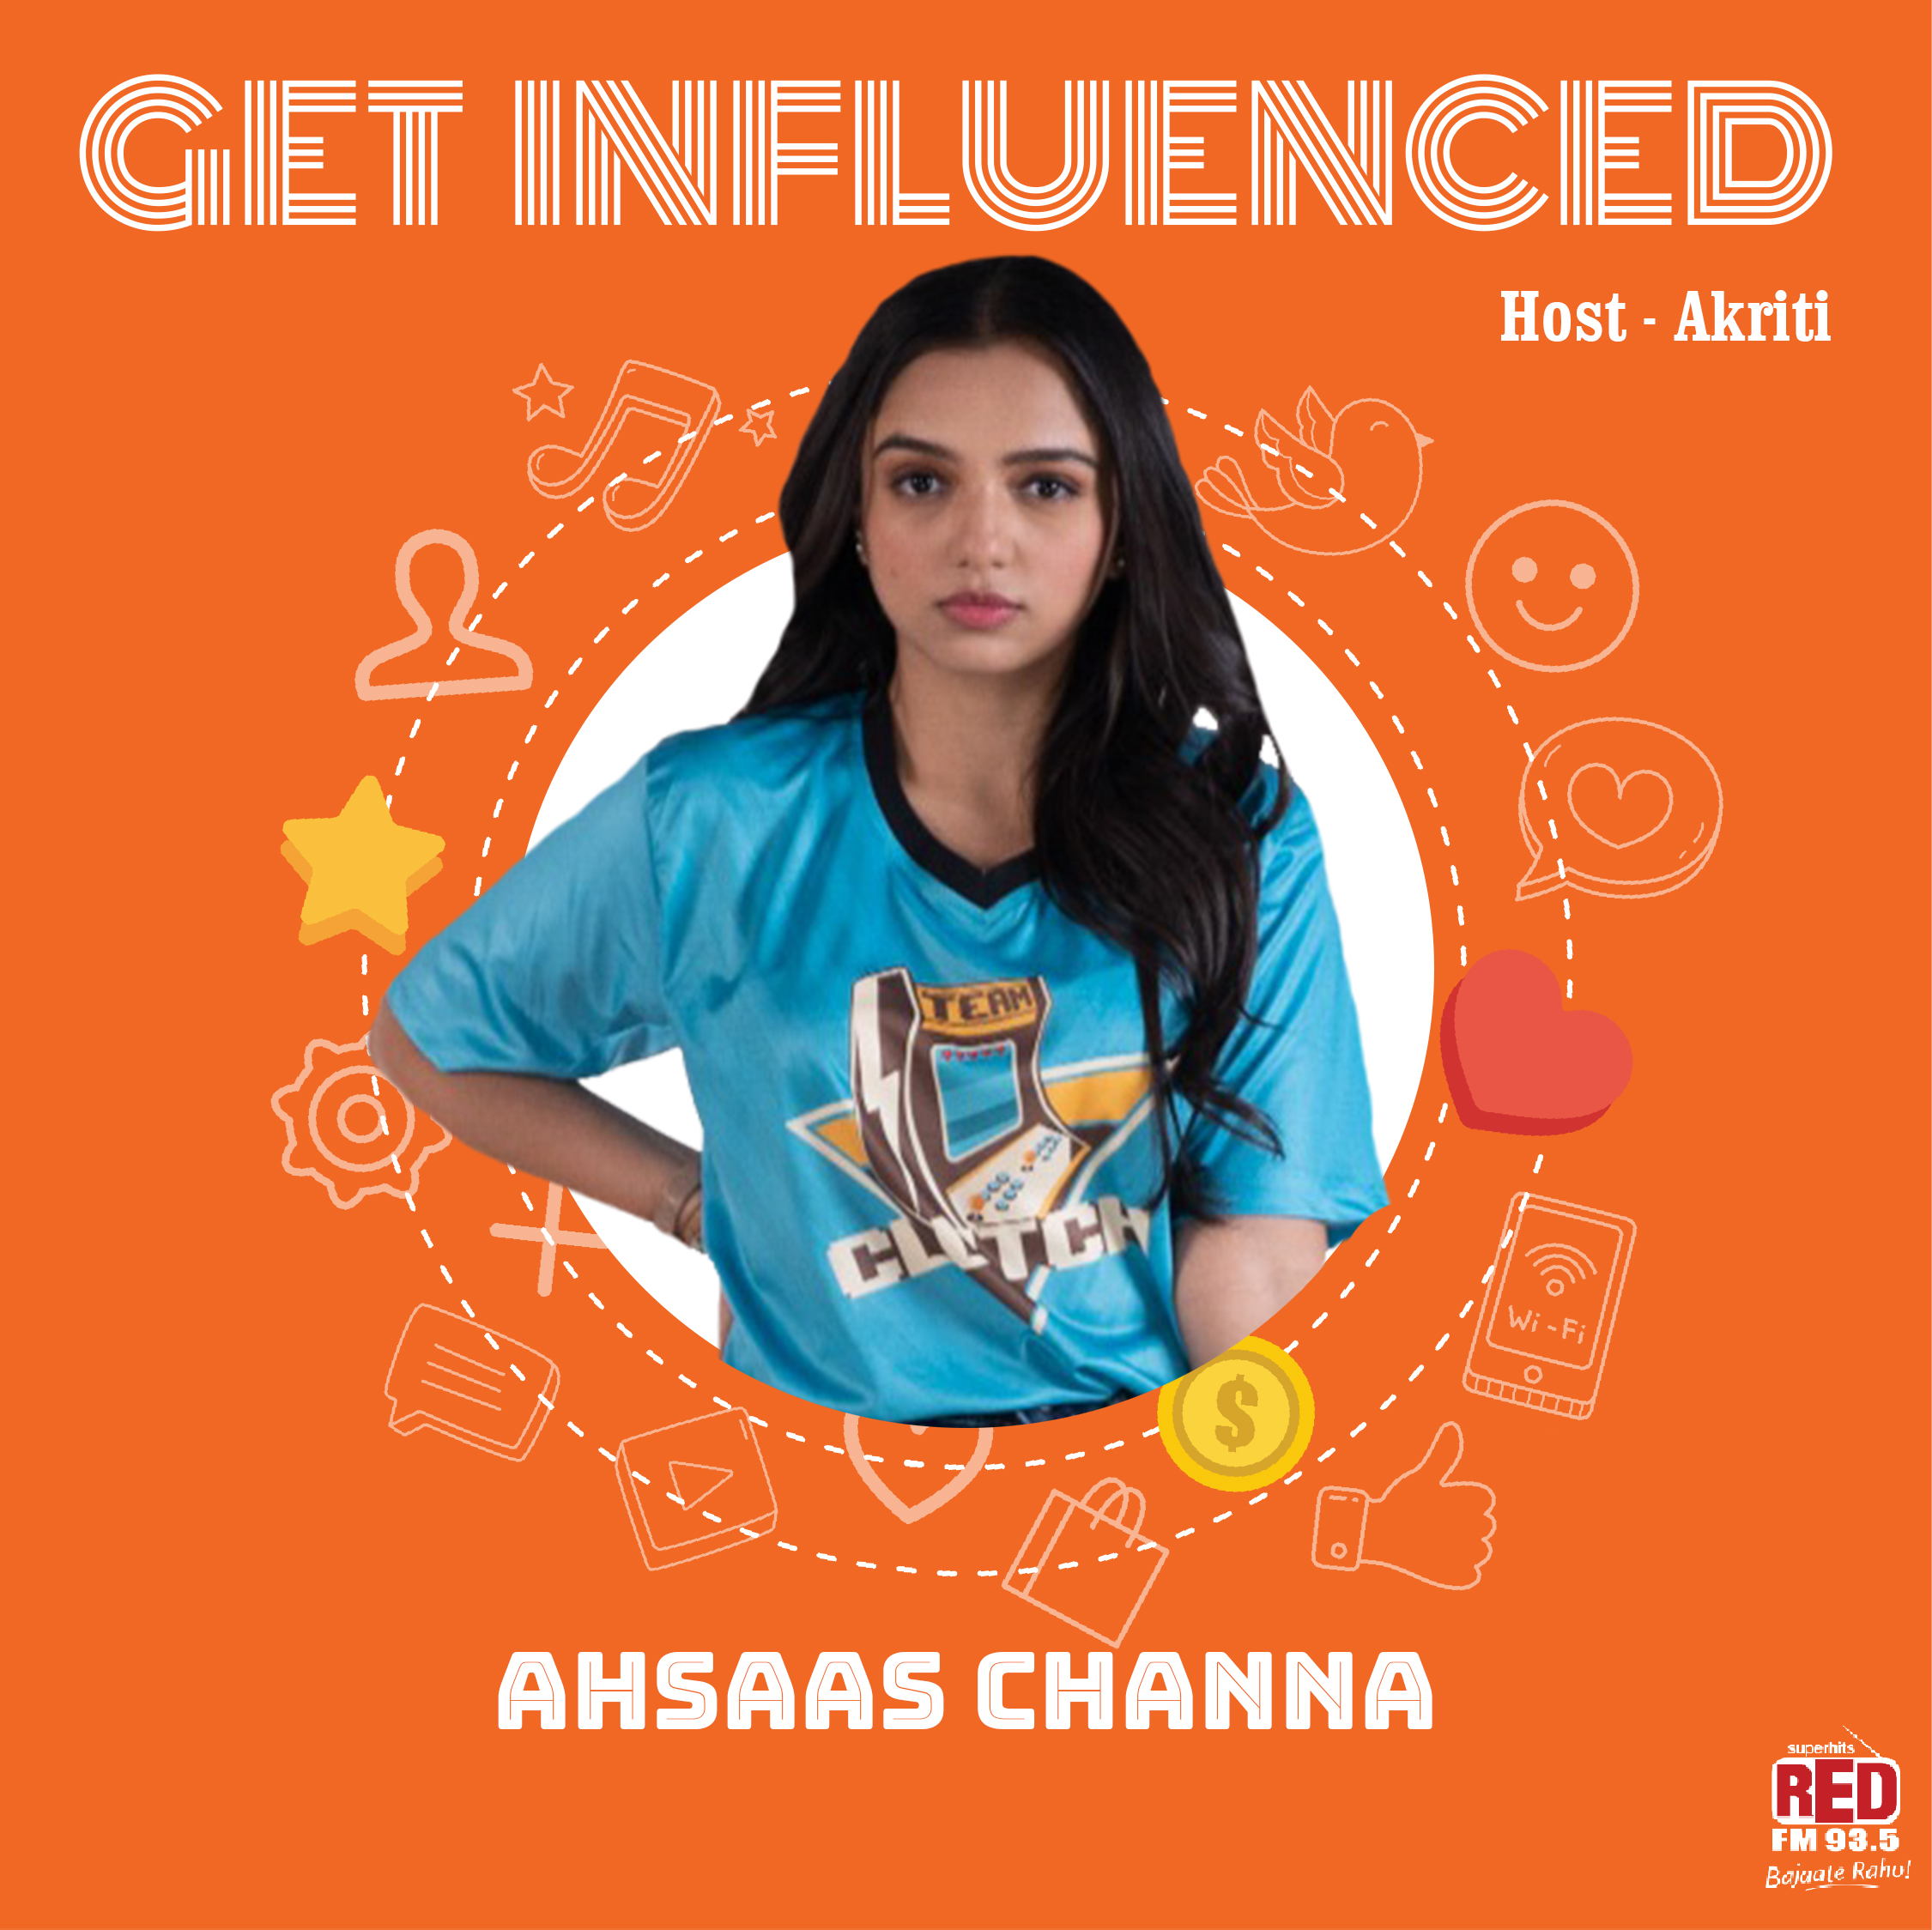 Ep-25 Get Influenced by Ahsaas Channa